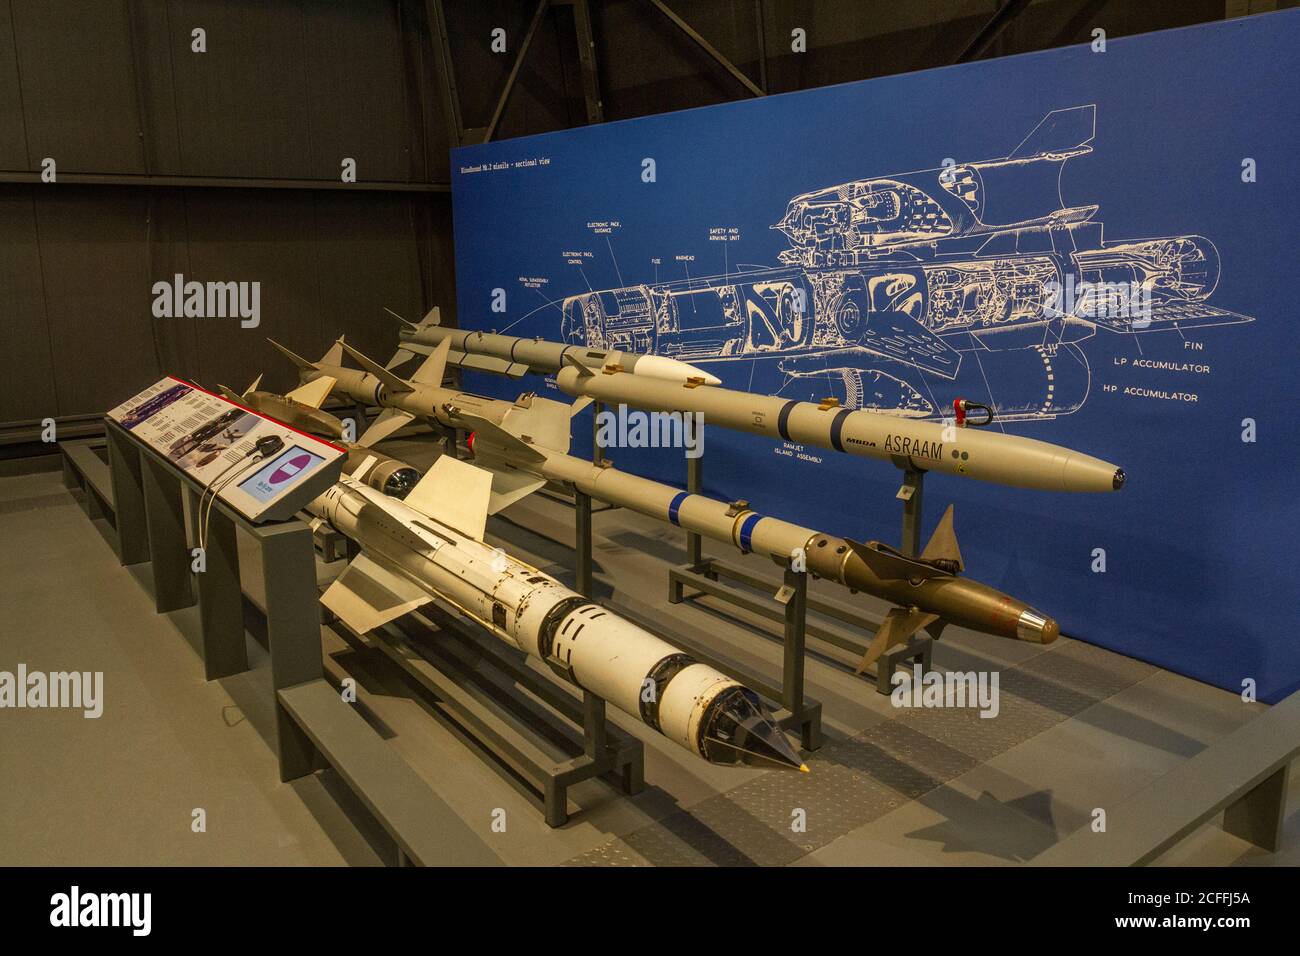 General view of several missiles on display in the RAF Museum, London, UK. Stock Photo